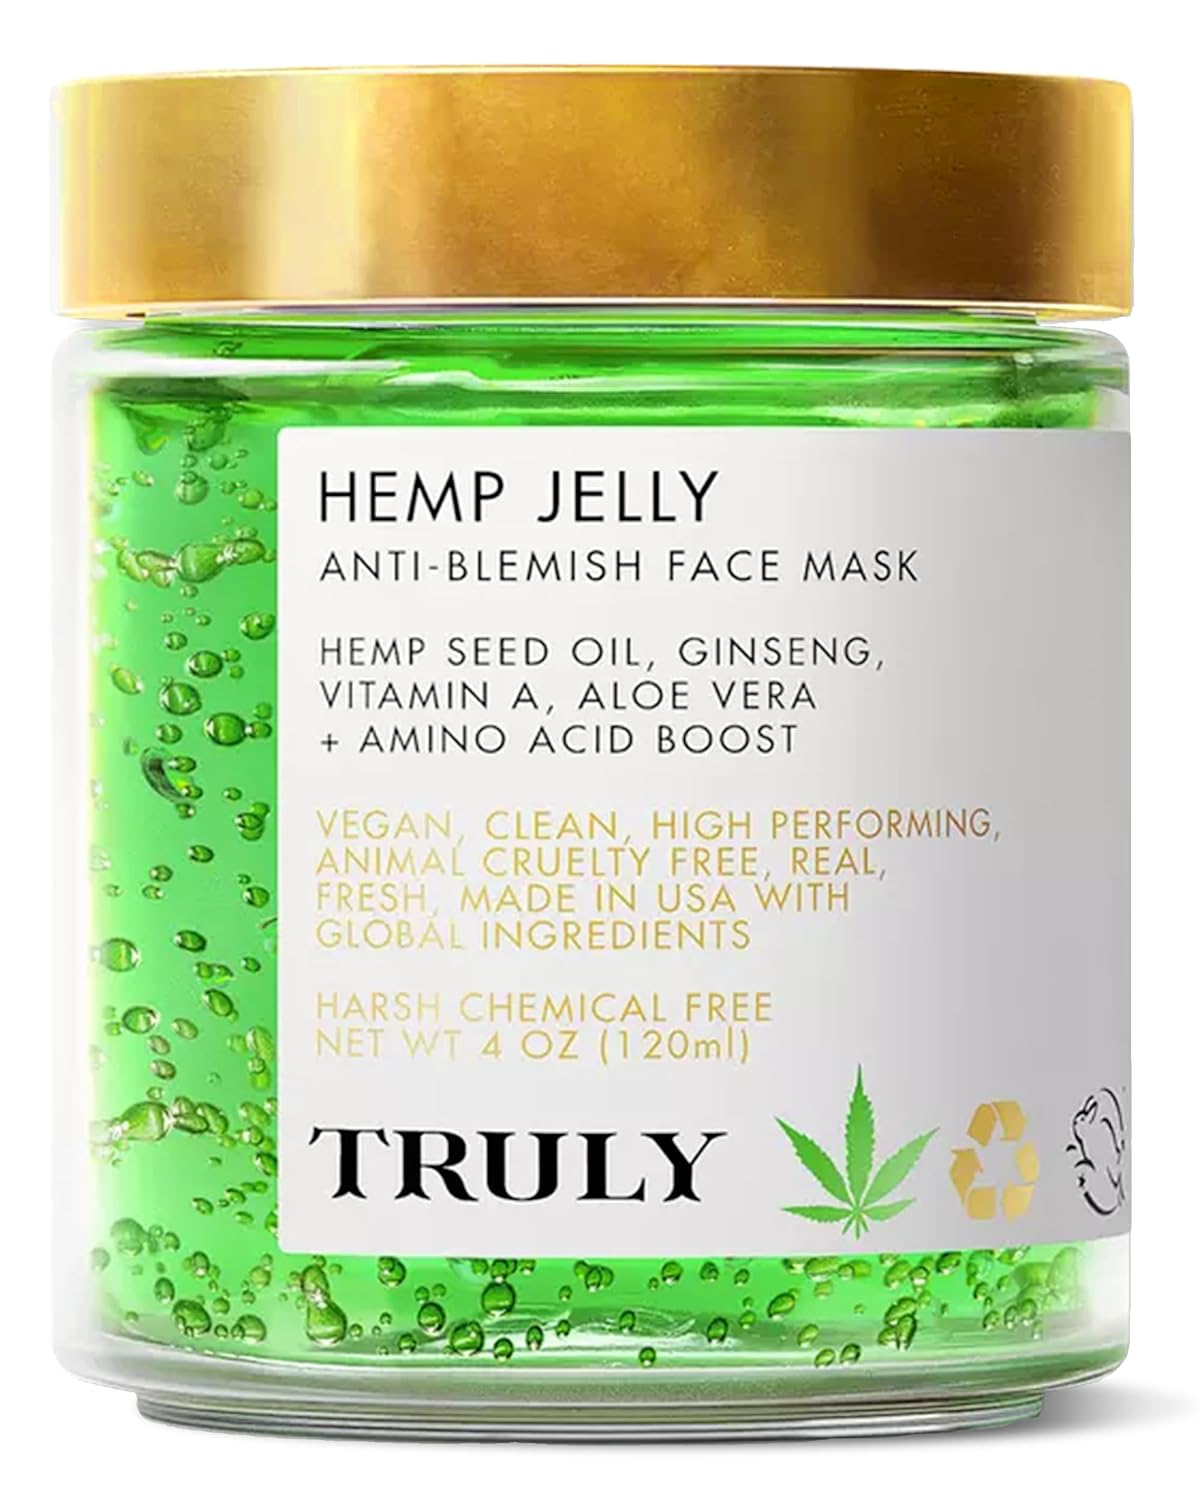 Truly Beauty Jelly Anti-Acne Face Mask Review